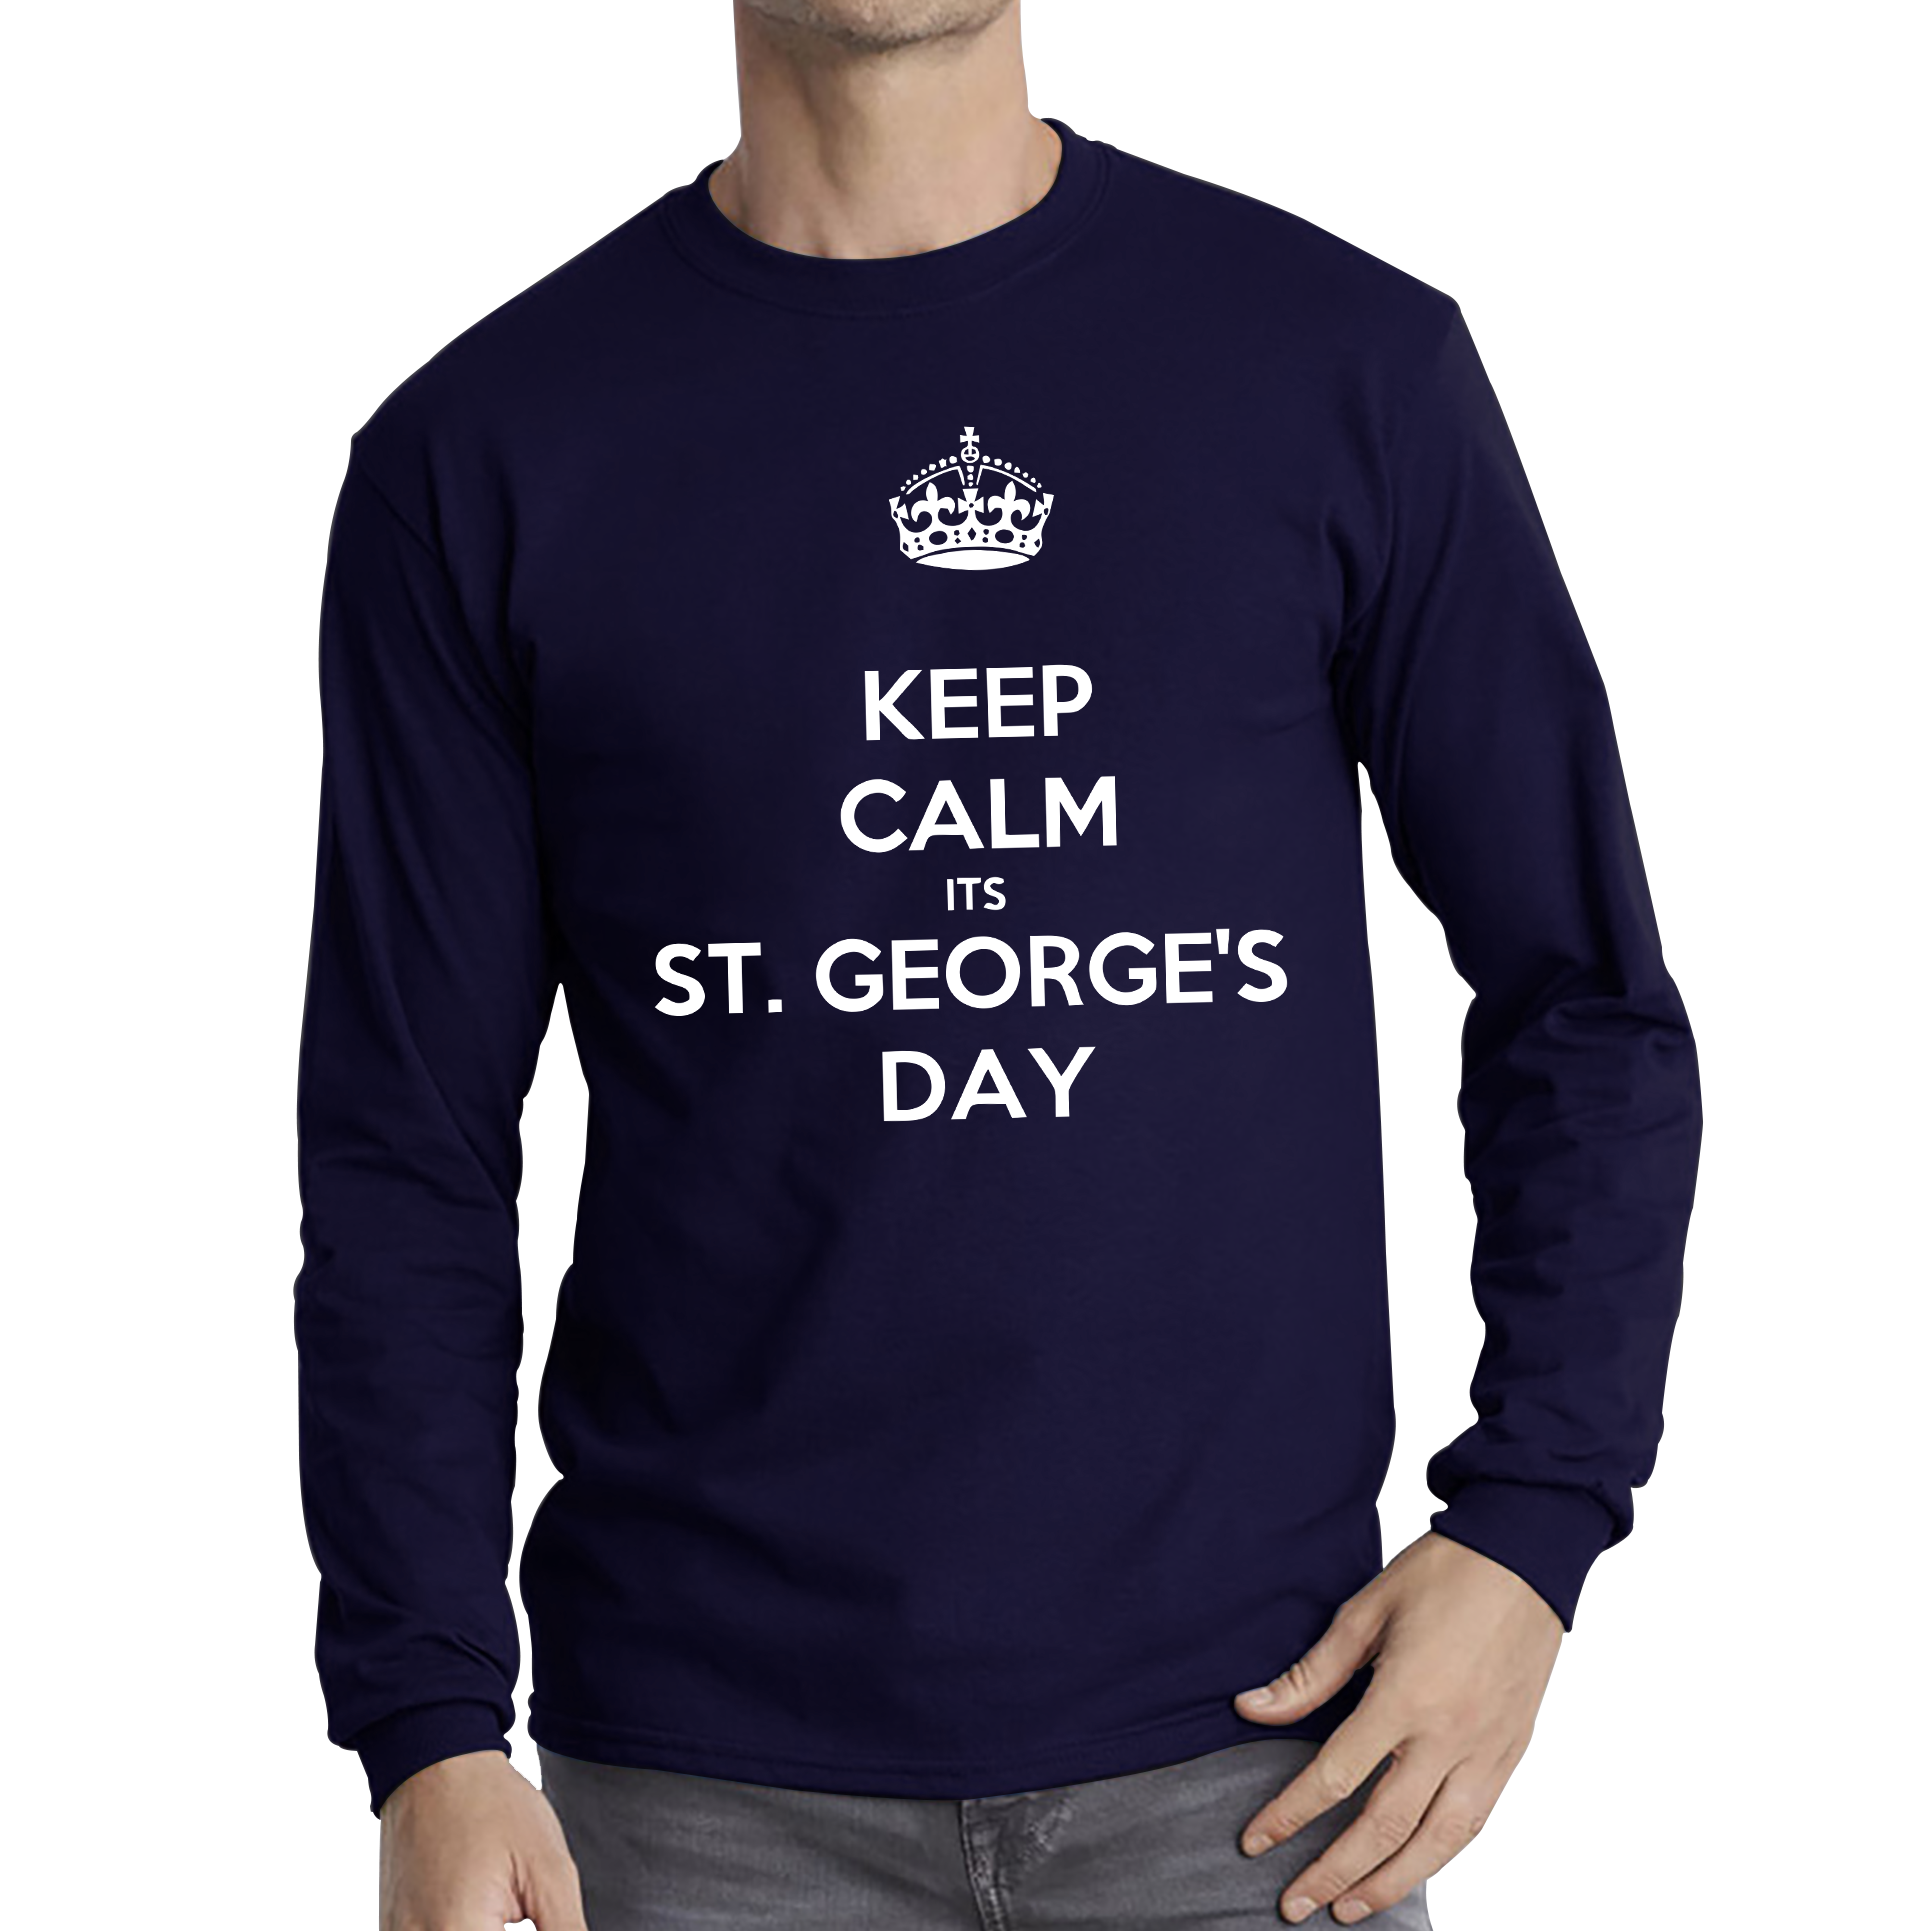 Keep Calm Its St. George's Day Adult Long Sleeve T Shirt